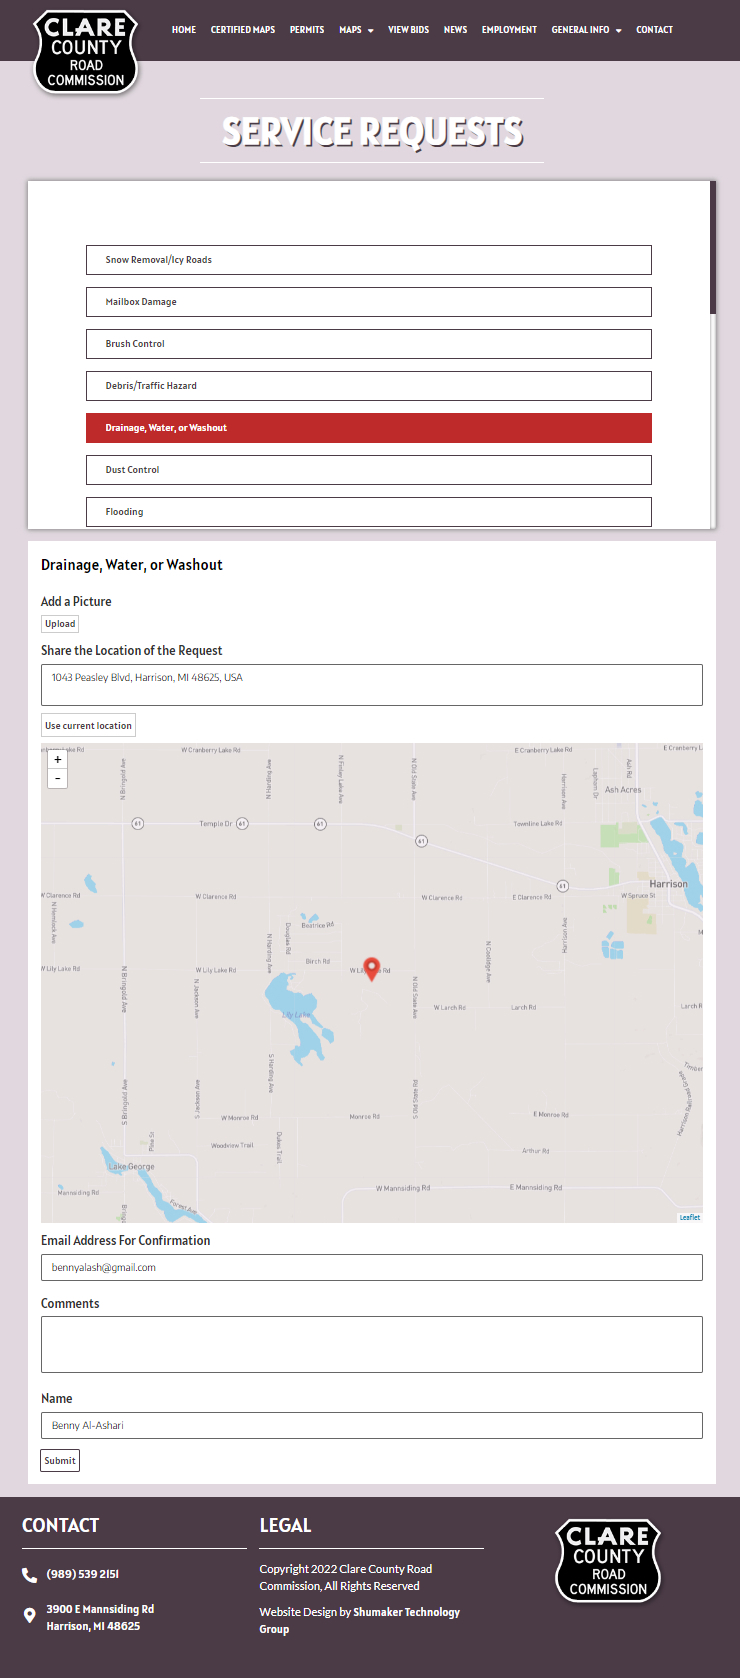 Clare County Road Commission Service Request Web App Pic